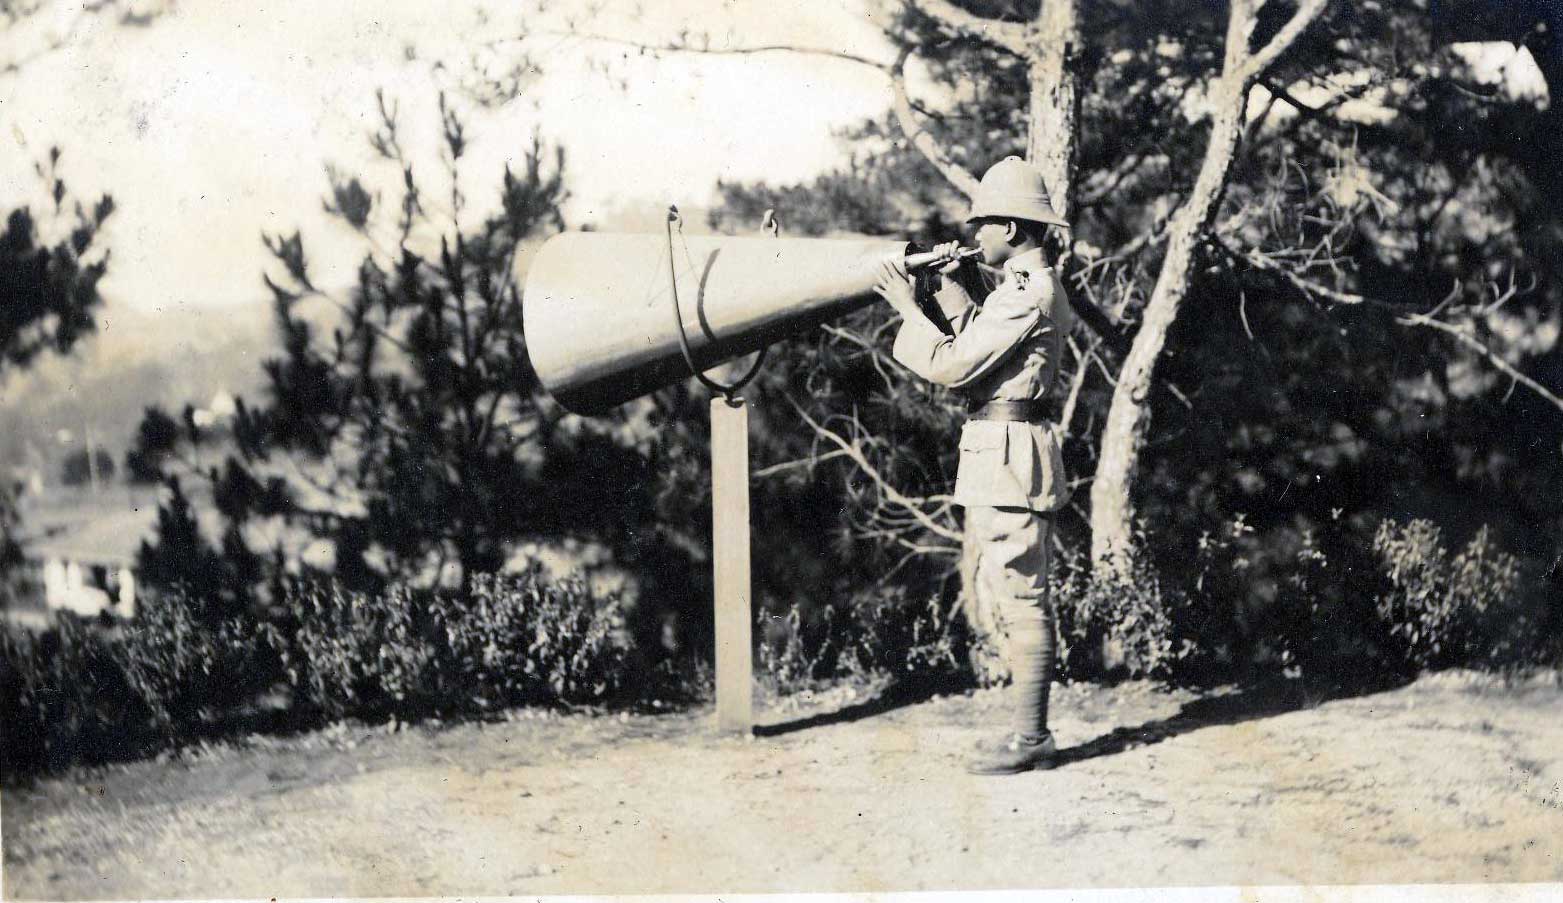 Featured photograph of a Filipino soldier blowing a horn to call for formation, from the University of Michigan Special Collections Library.